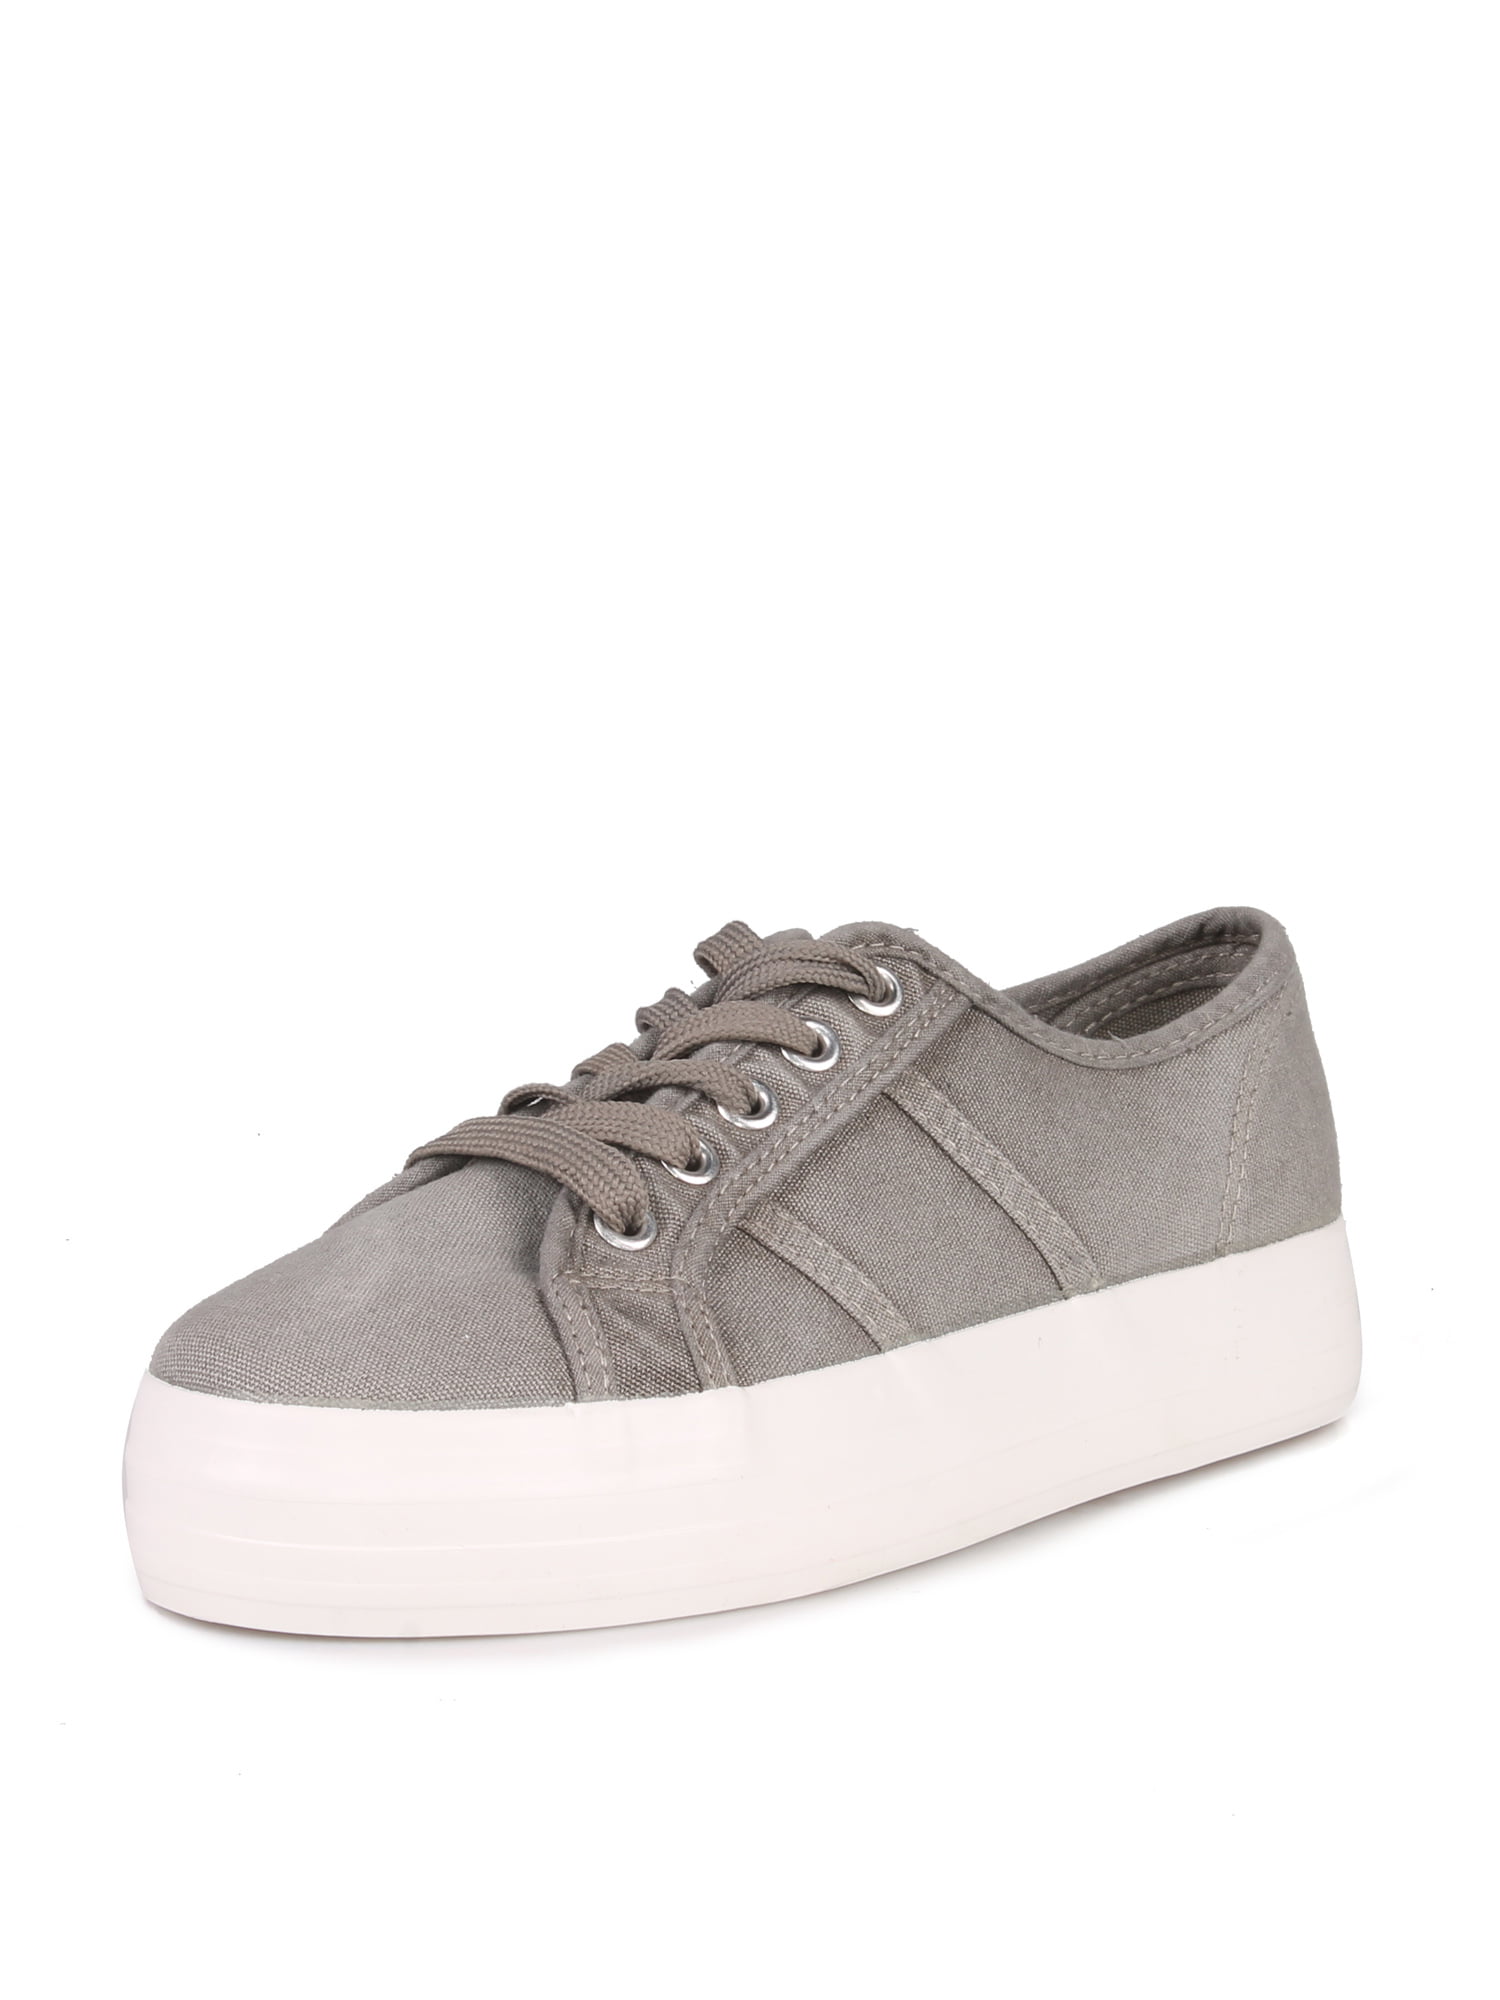 Nature Breeze Lace up Canvas Sneakers in Grey - Walmart.com